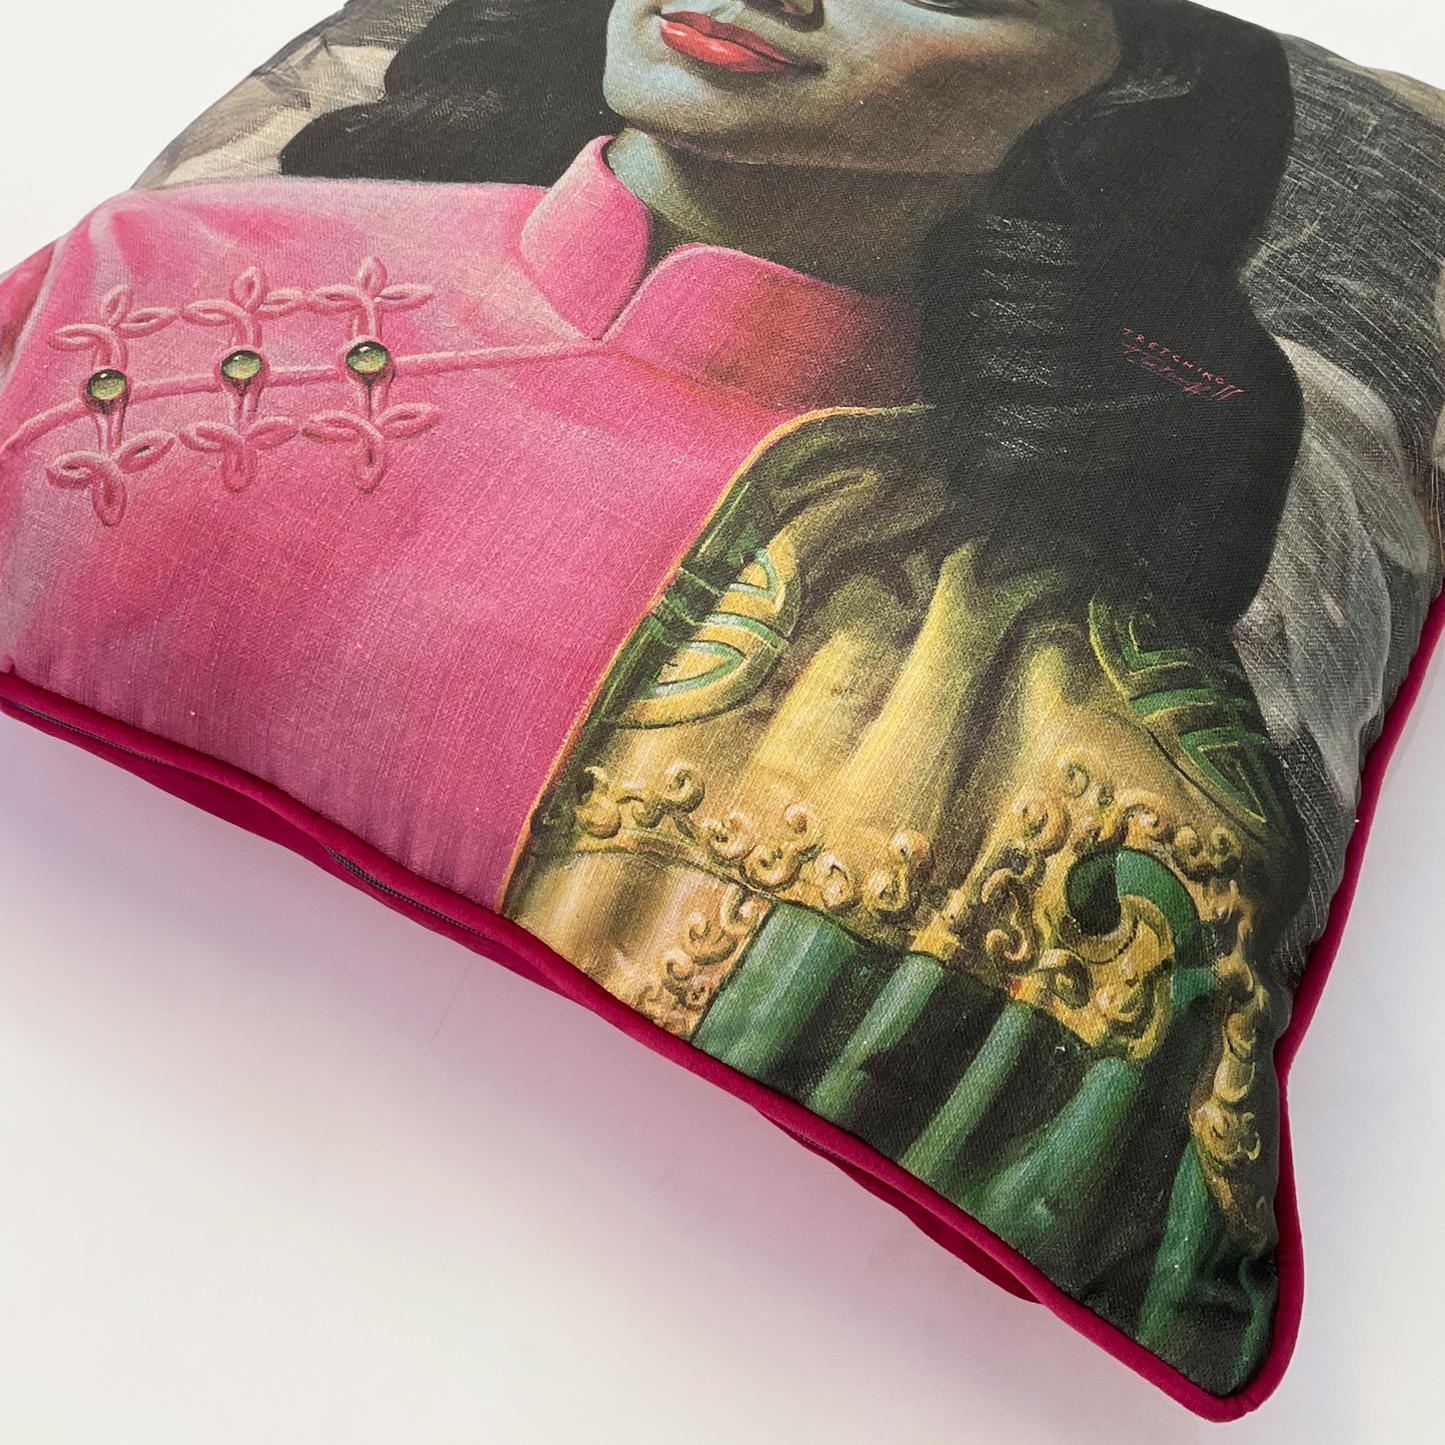 Miss Wong Square Cushion Cover - Tretchikoff